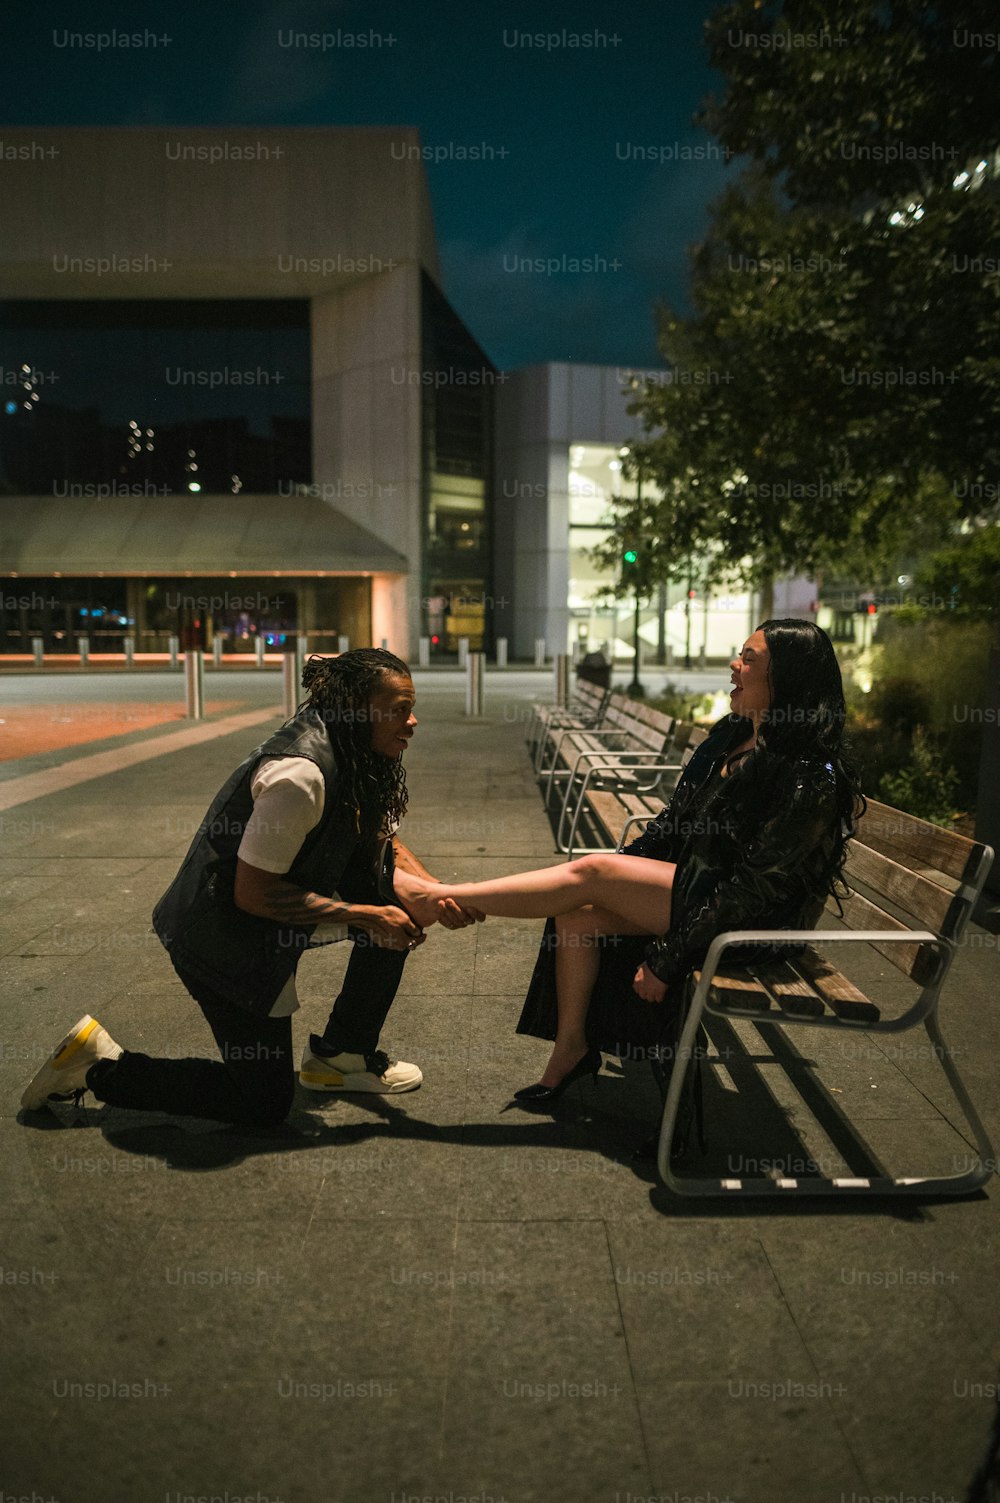 a man kneeling down next to a woman on a bench